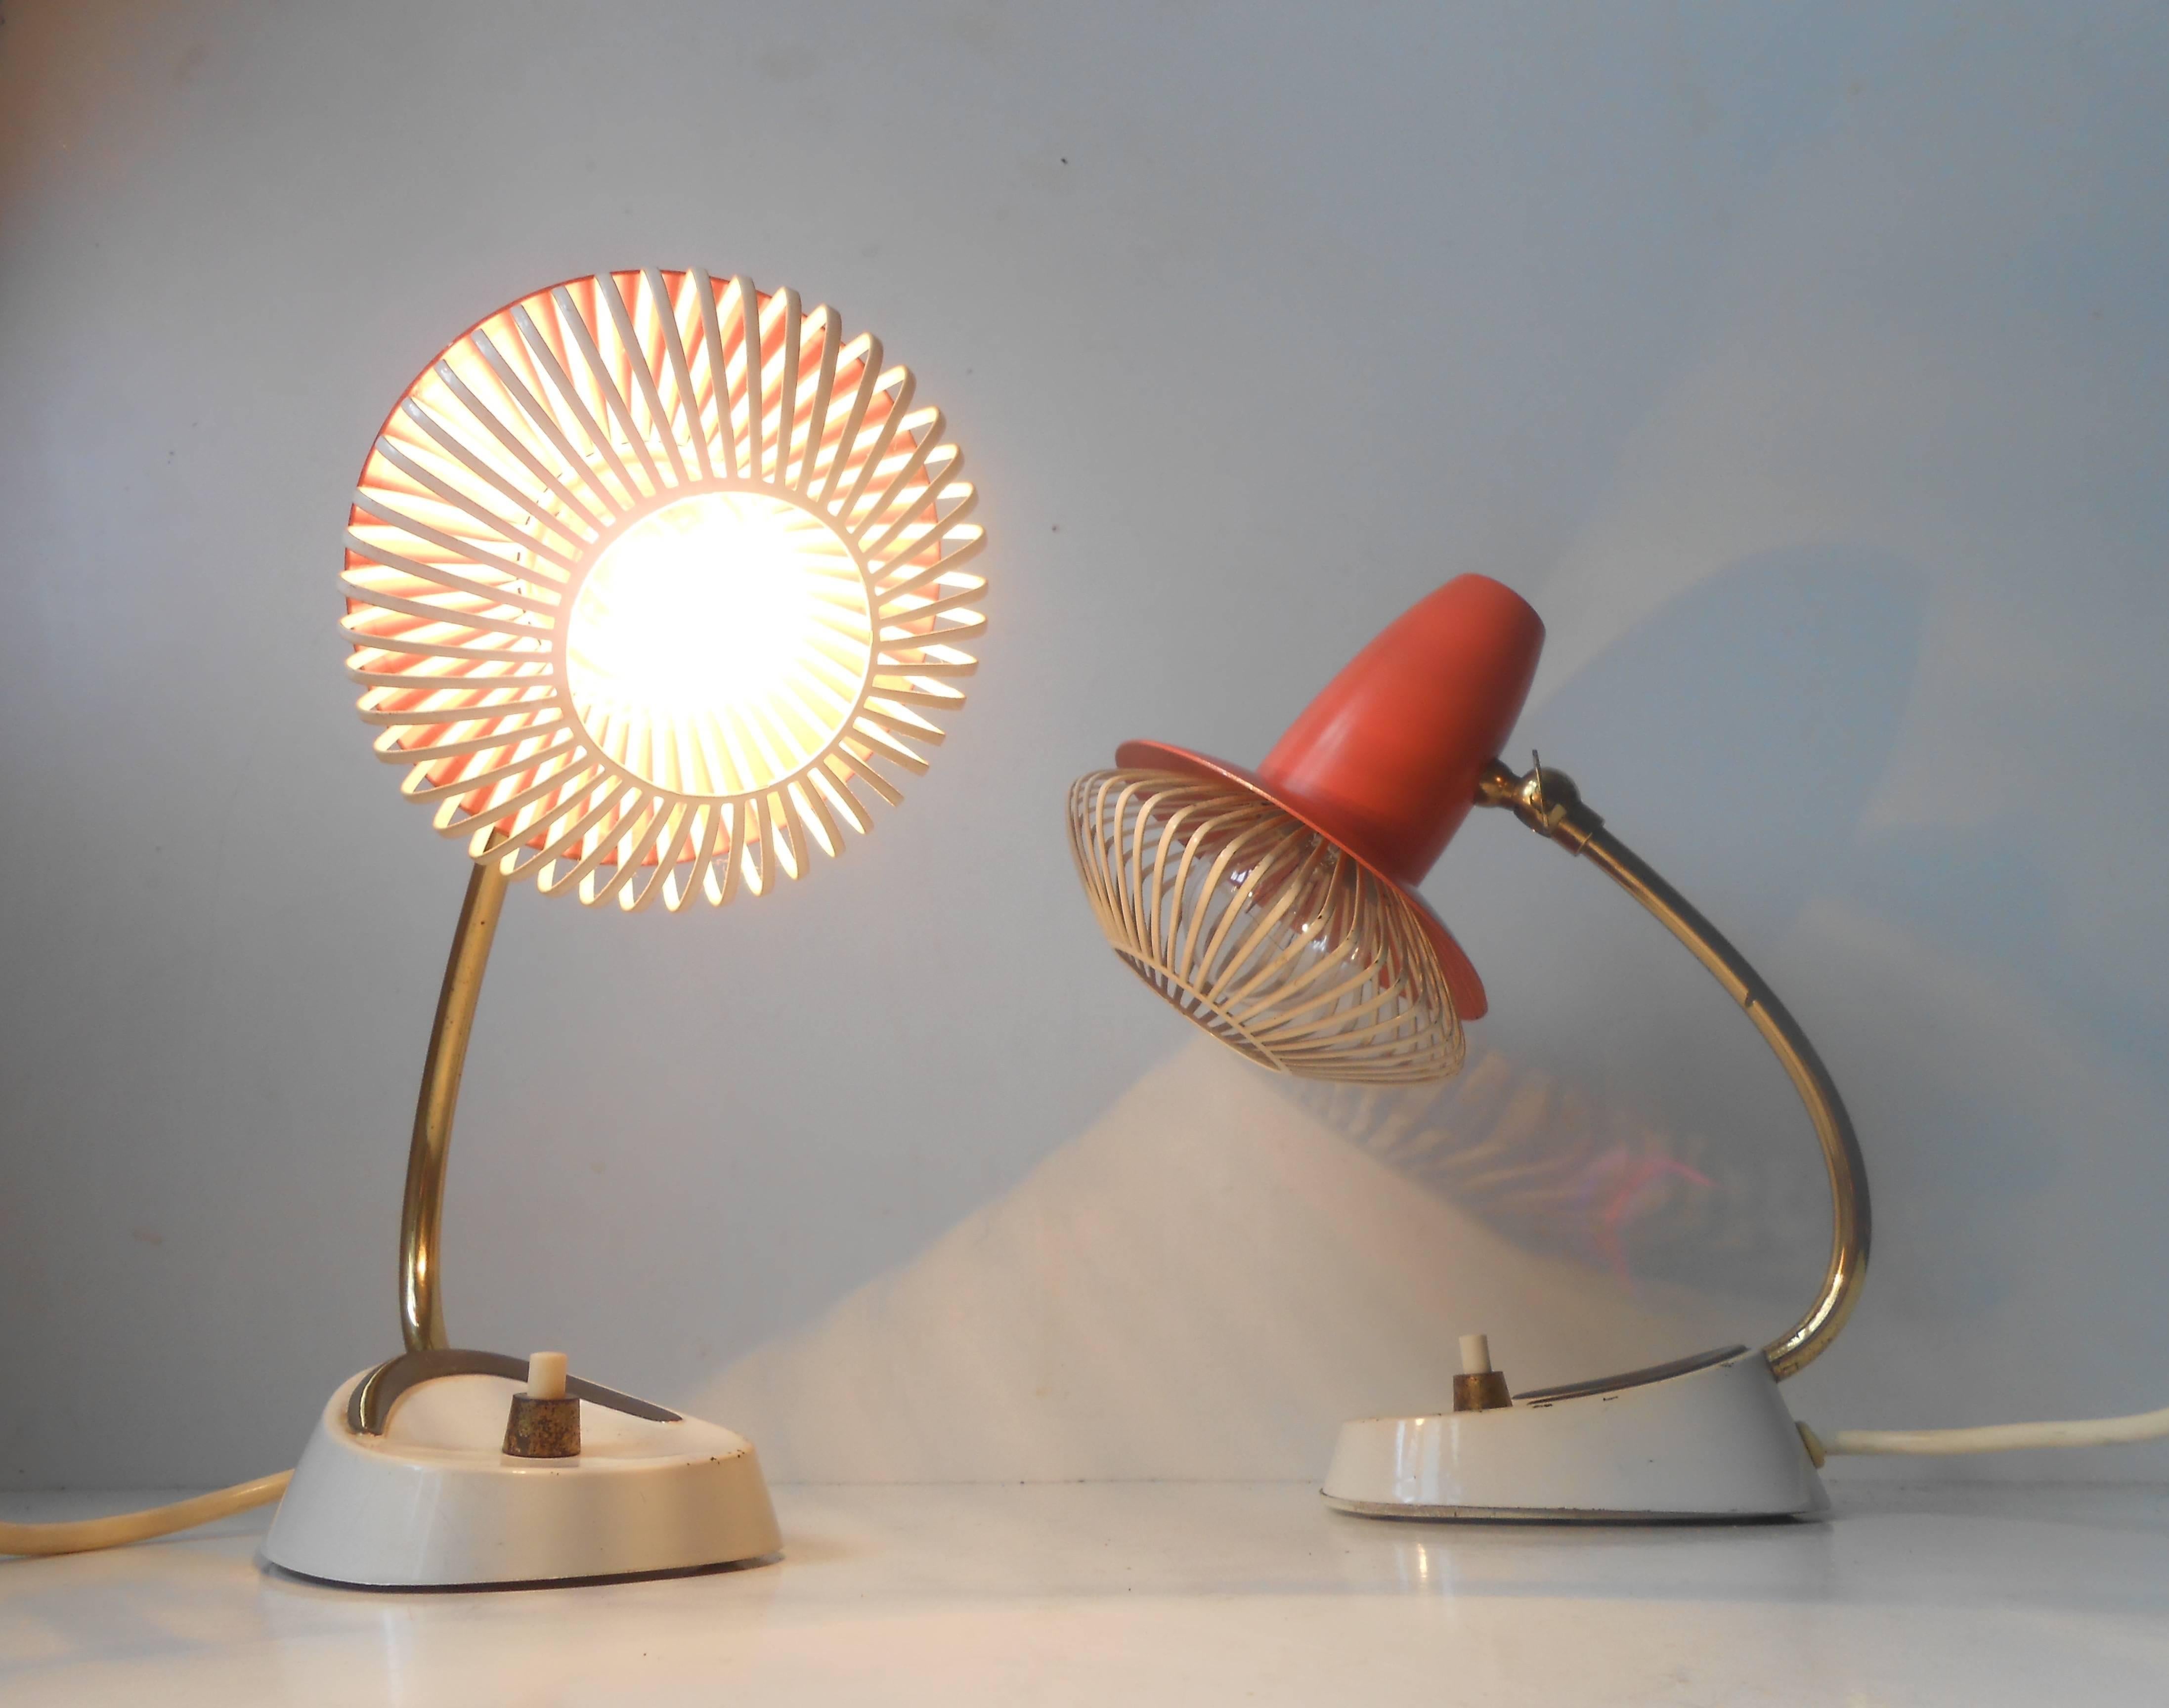 Mid-Century Modern Pair of Adjustable Red Table Lamps, Stilnovo Style, Possibly Swiss, ca. 1958-60